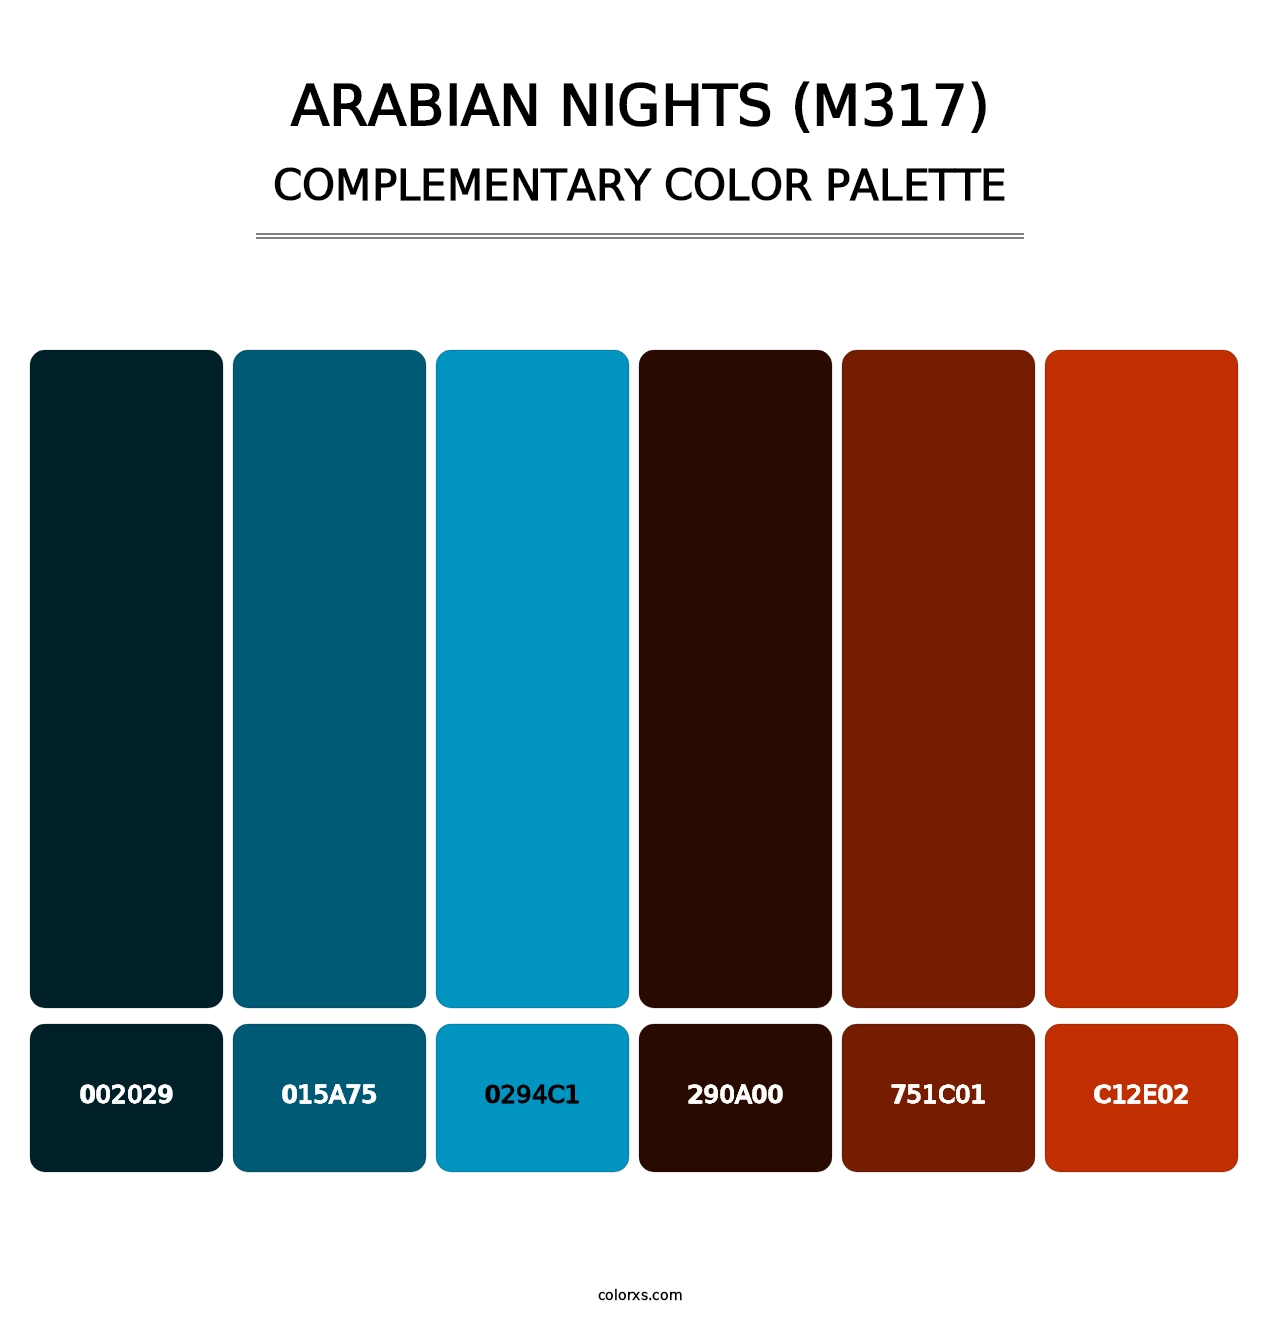 Arabian Nights (M317) - Complementary Color Palette